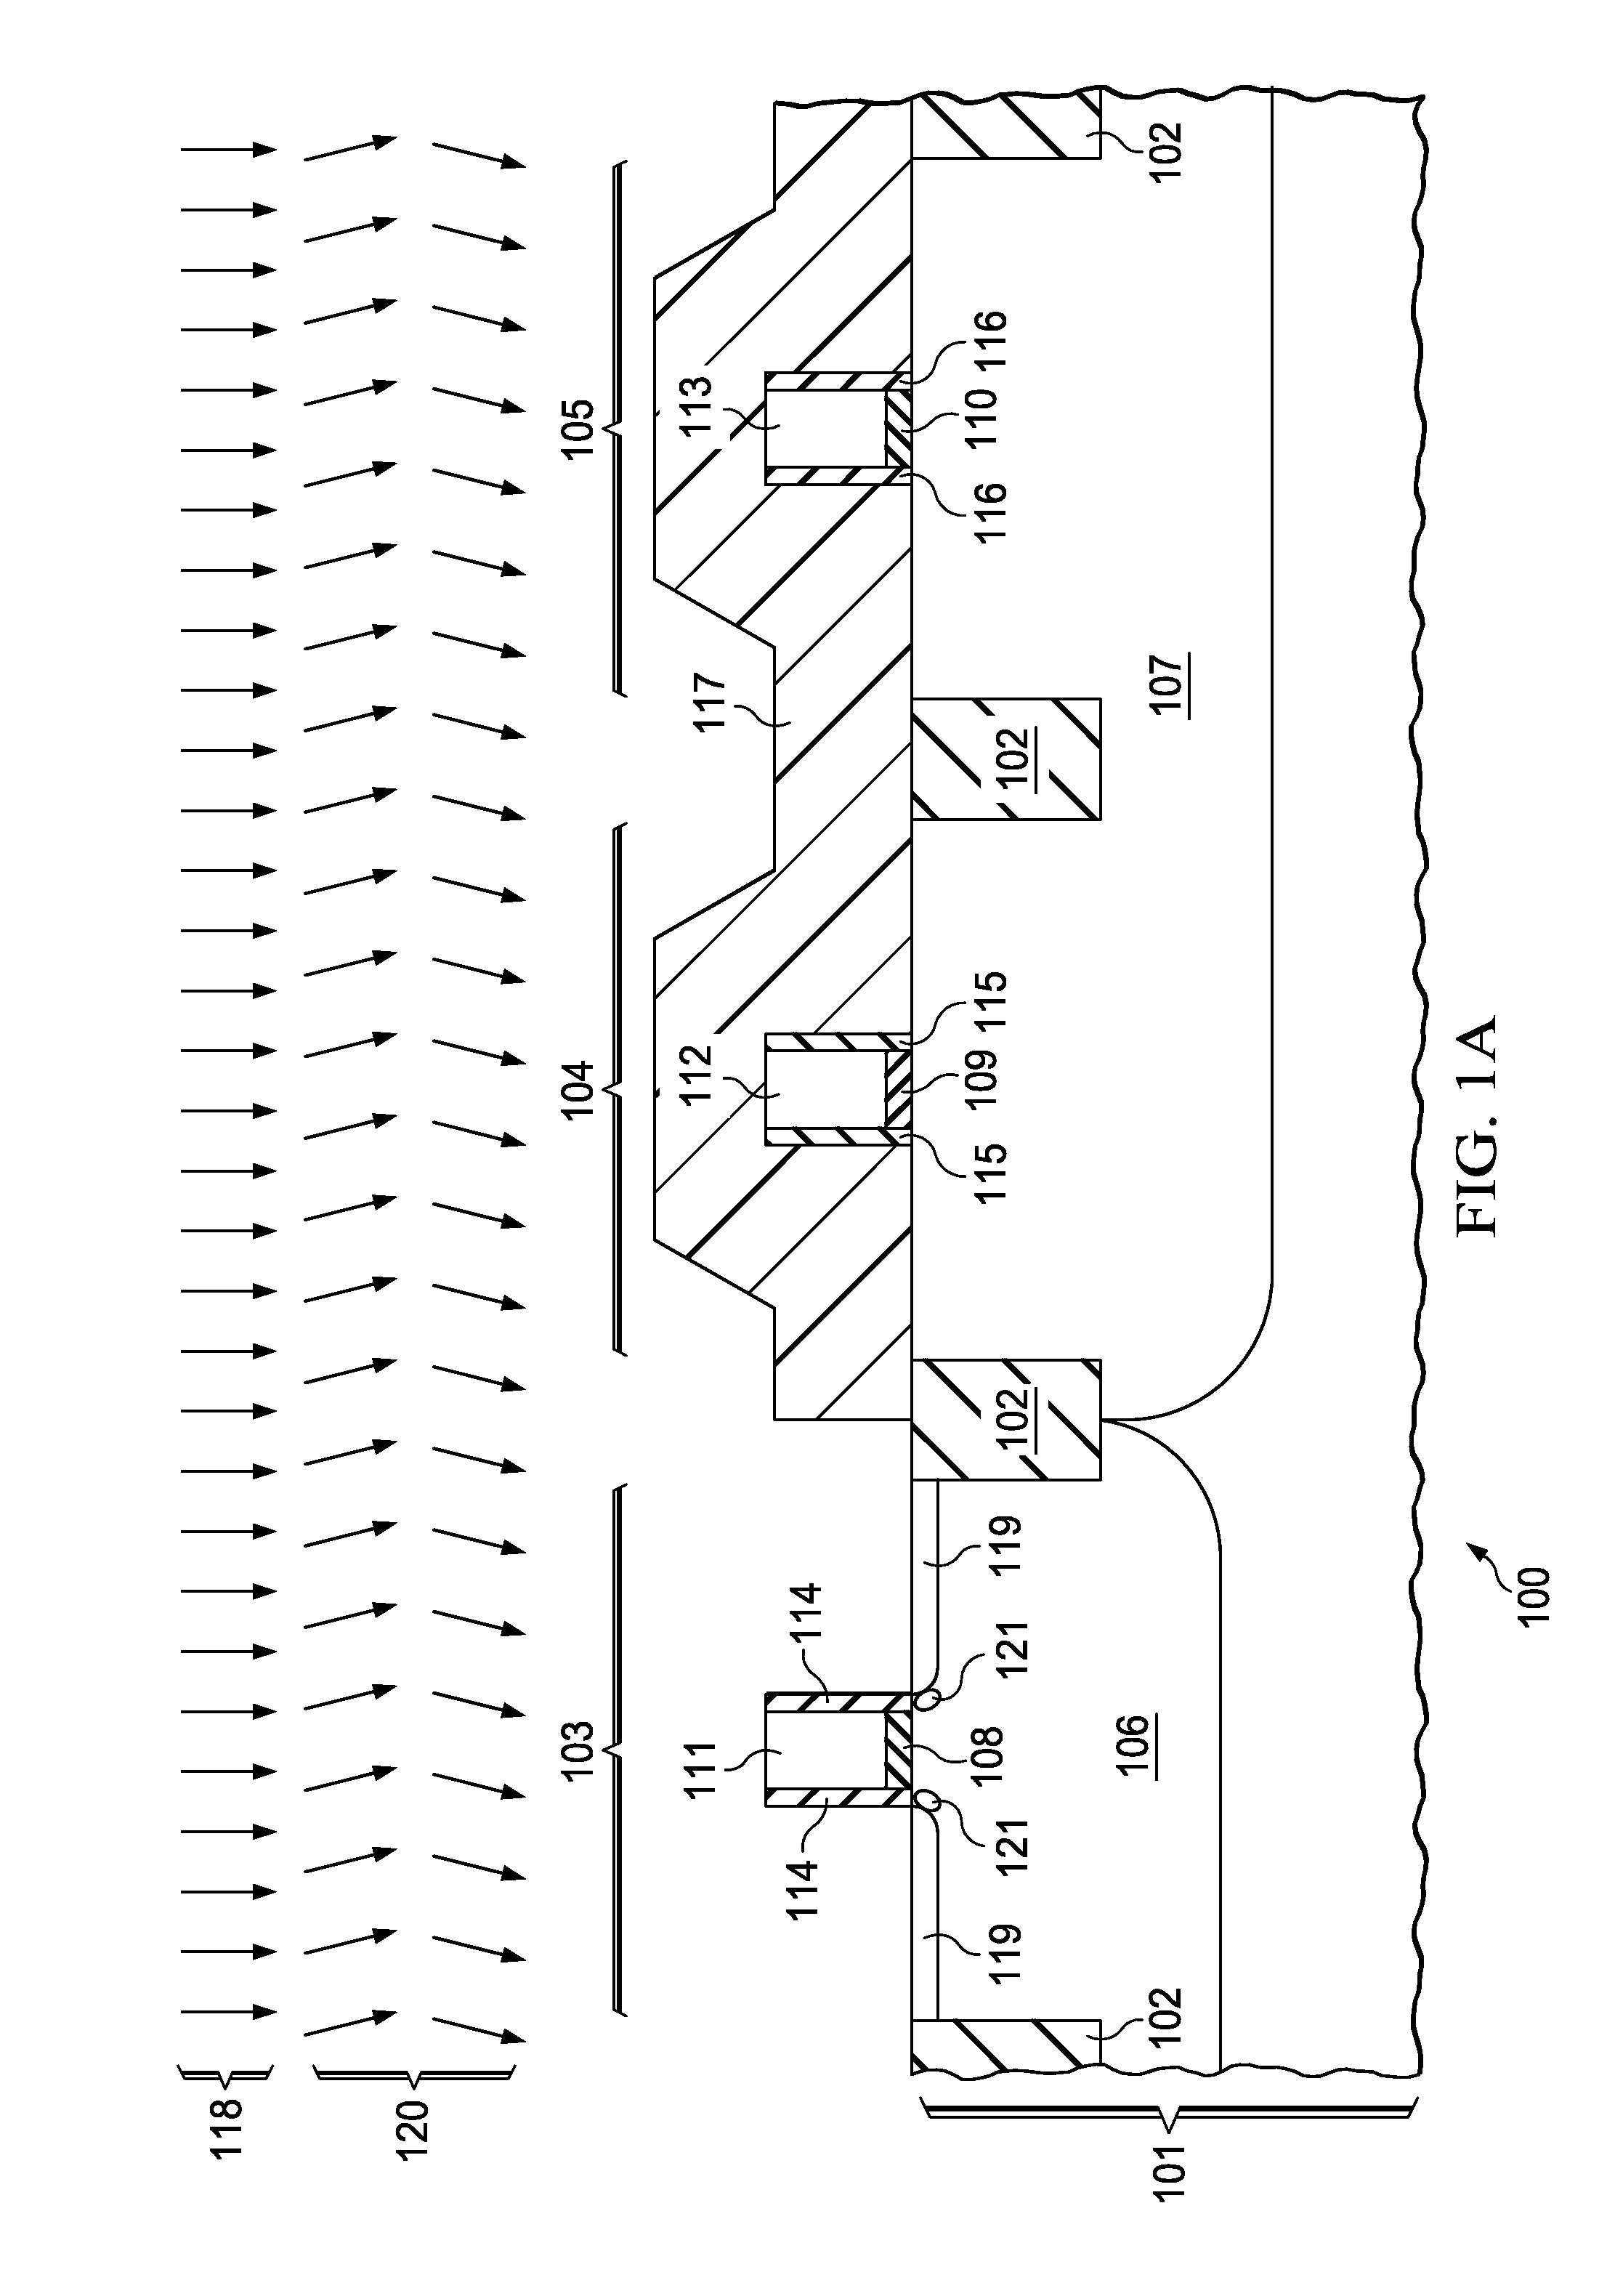 Two terminal quantum device using MOS capacitor structure